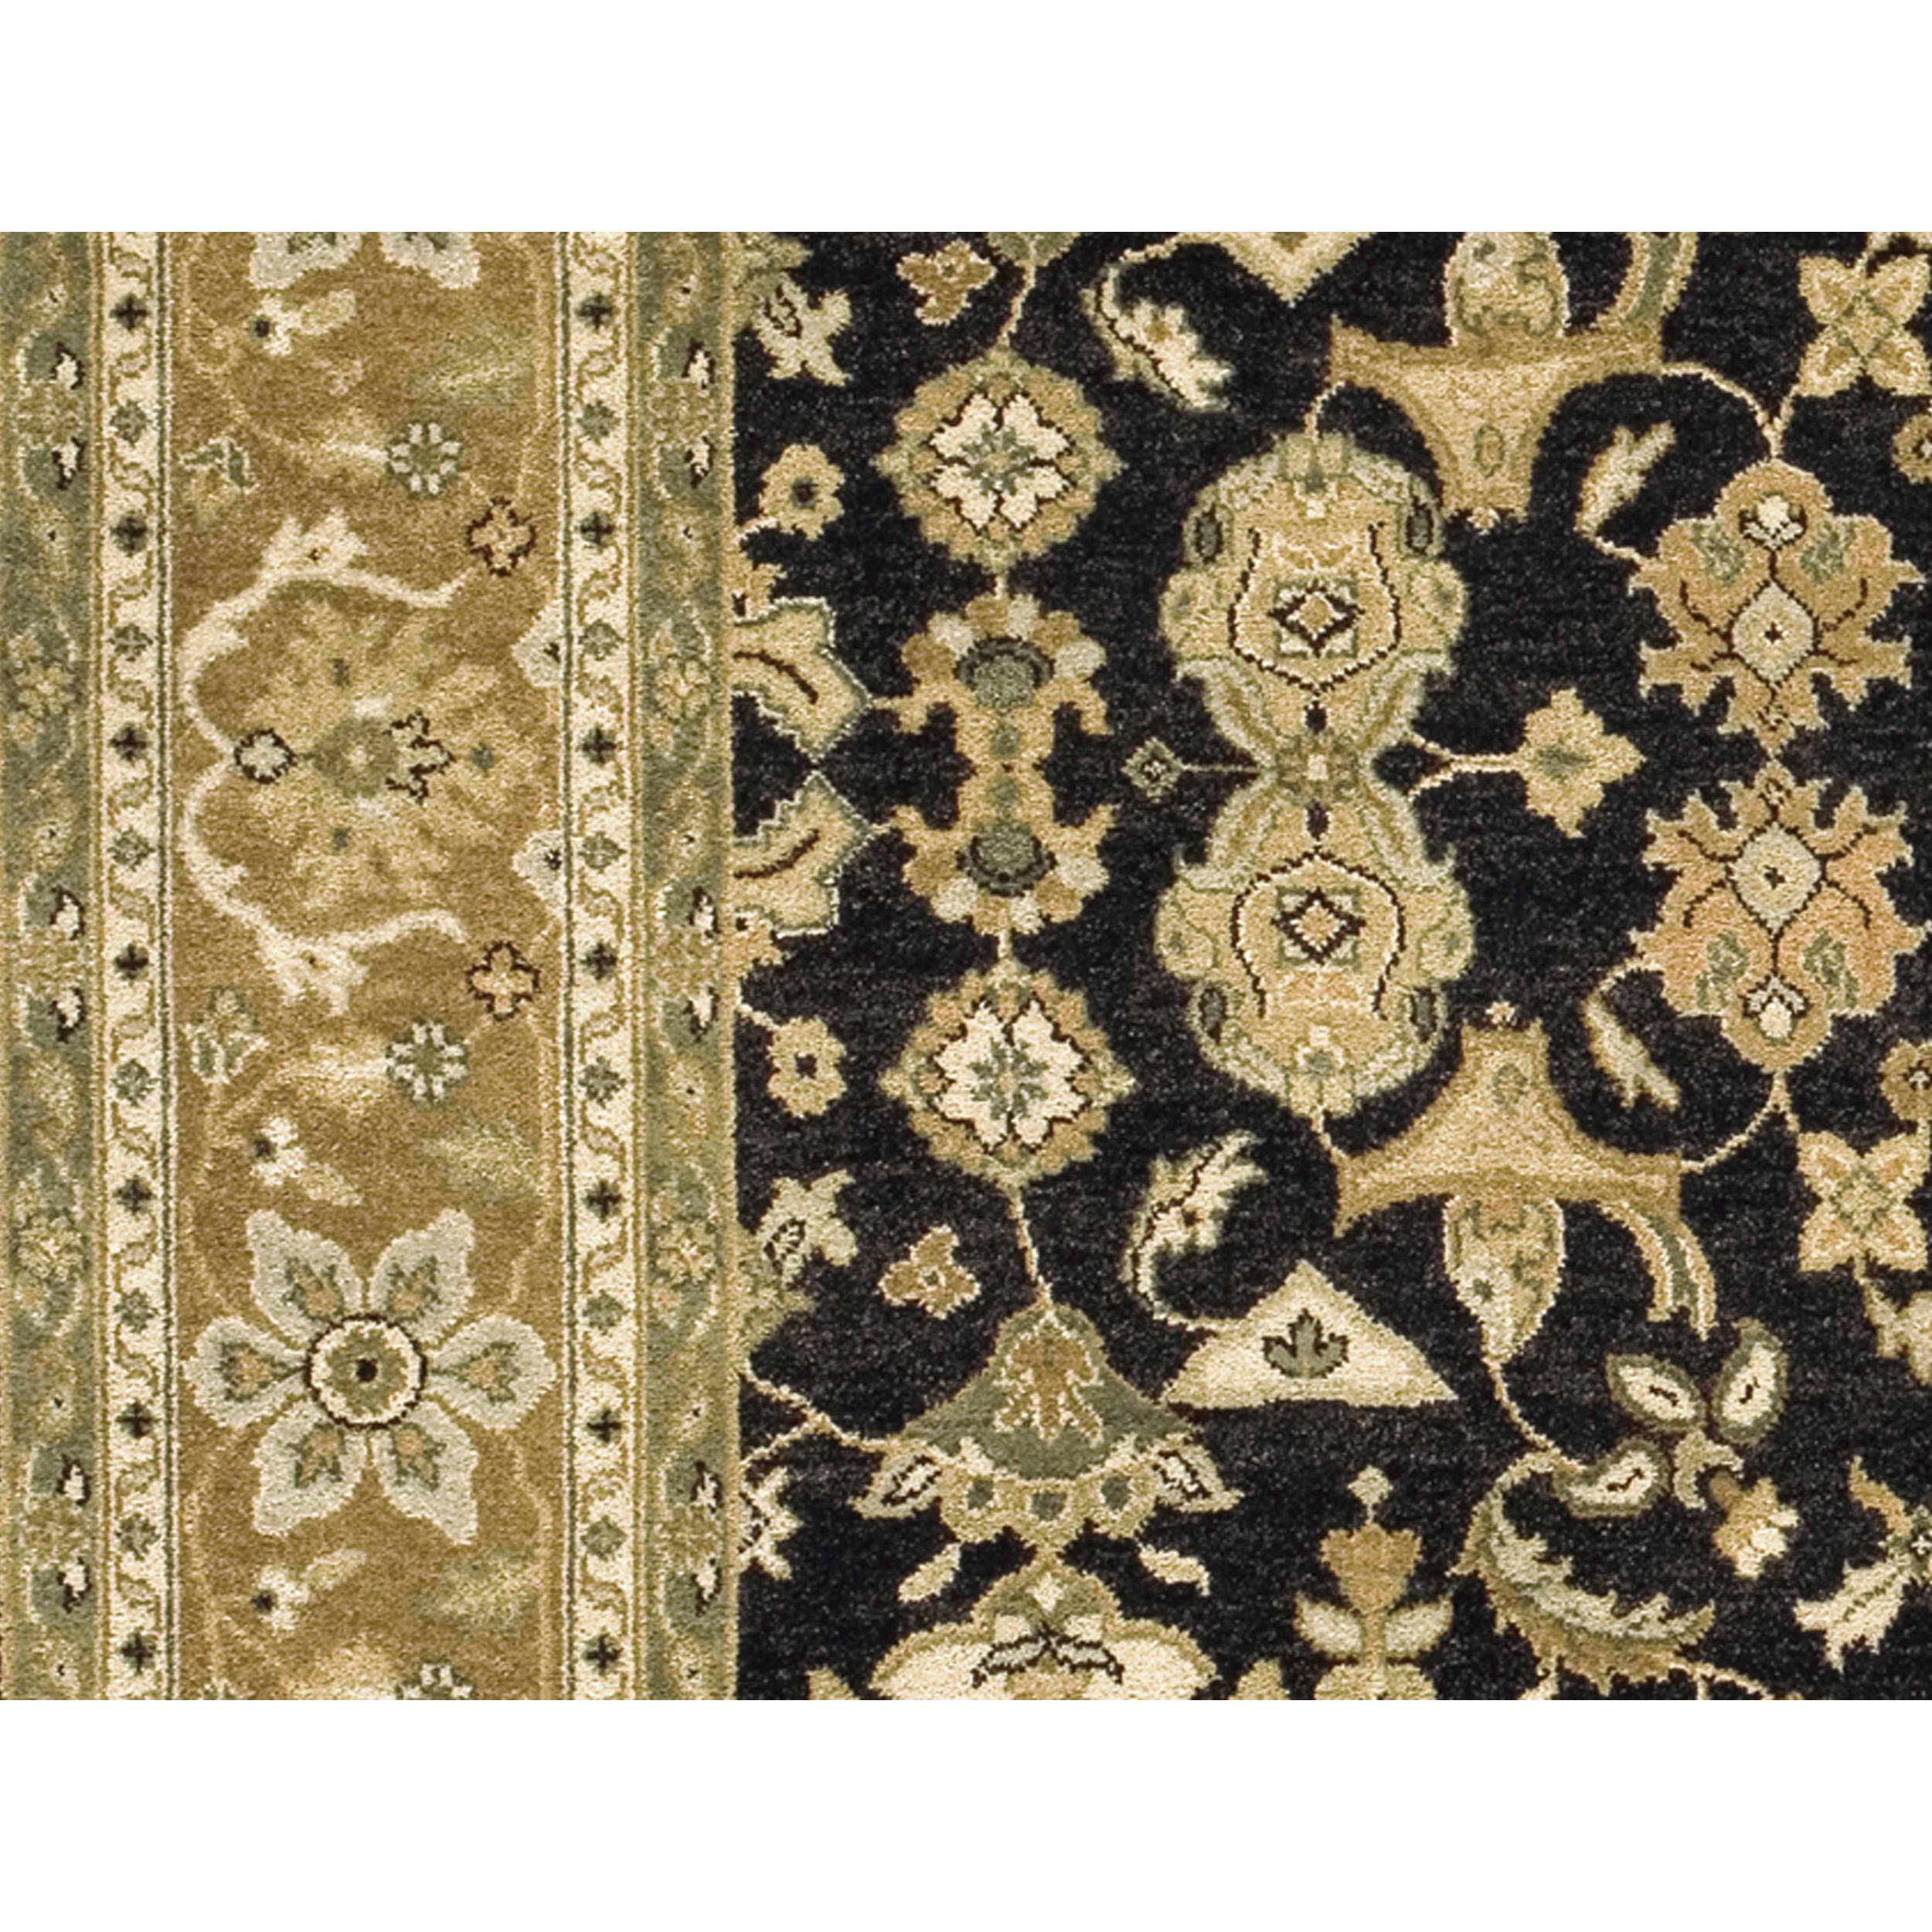 This hand-knotted Mahal rug, measuring an impressive 12 feet by 22 feet, is a masterpiece of traditional design. Floral motifs and surrounded by elegantly flowing vines and palmettes. The symmetry of the design, a hallmark of Mahal rugs, imparts a